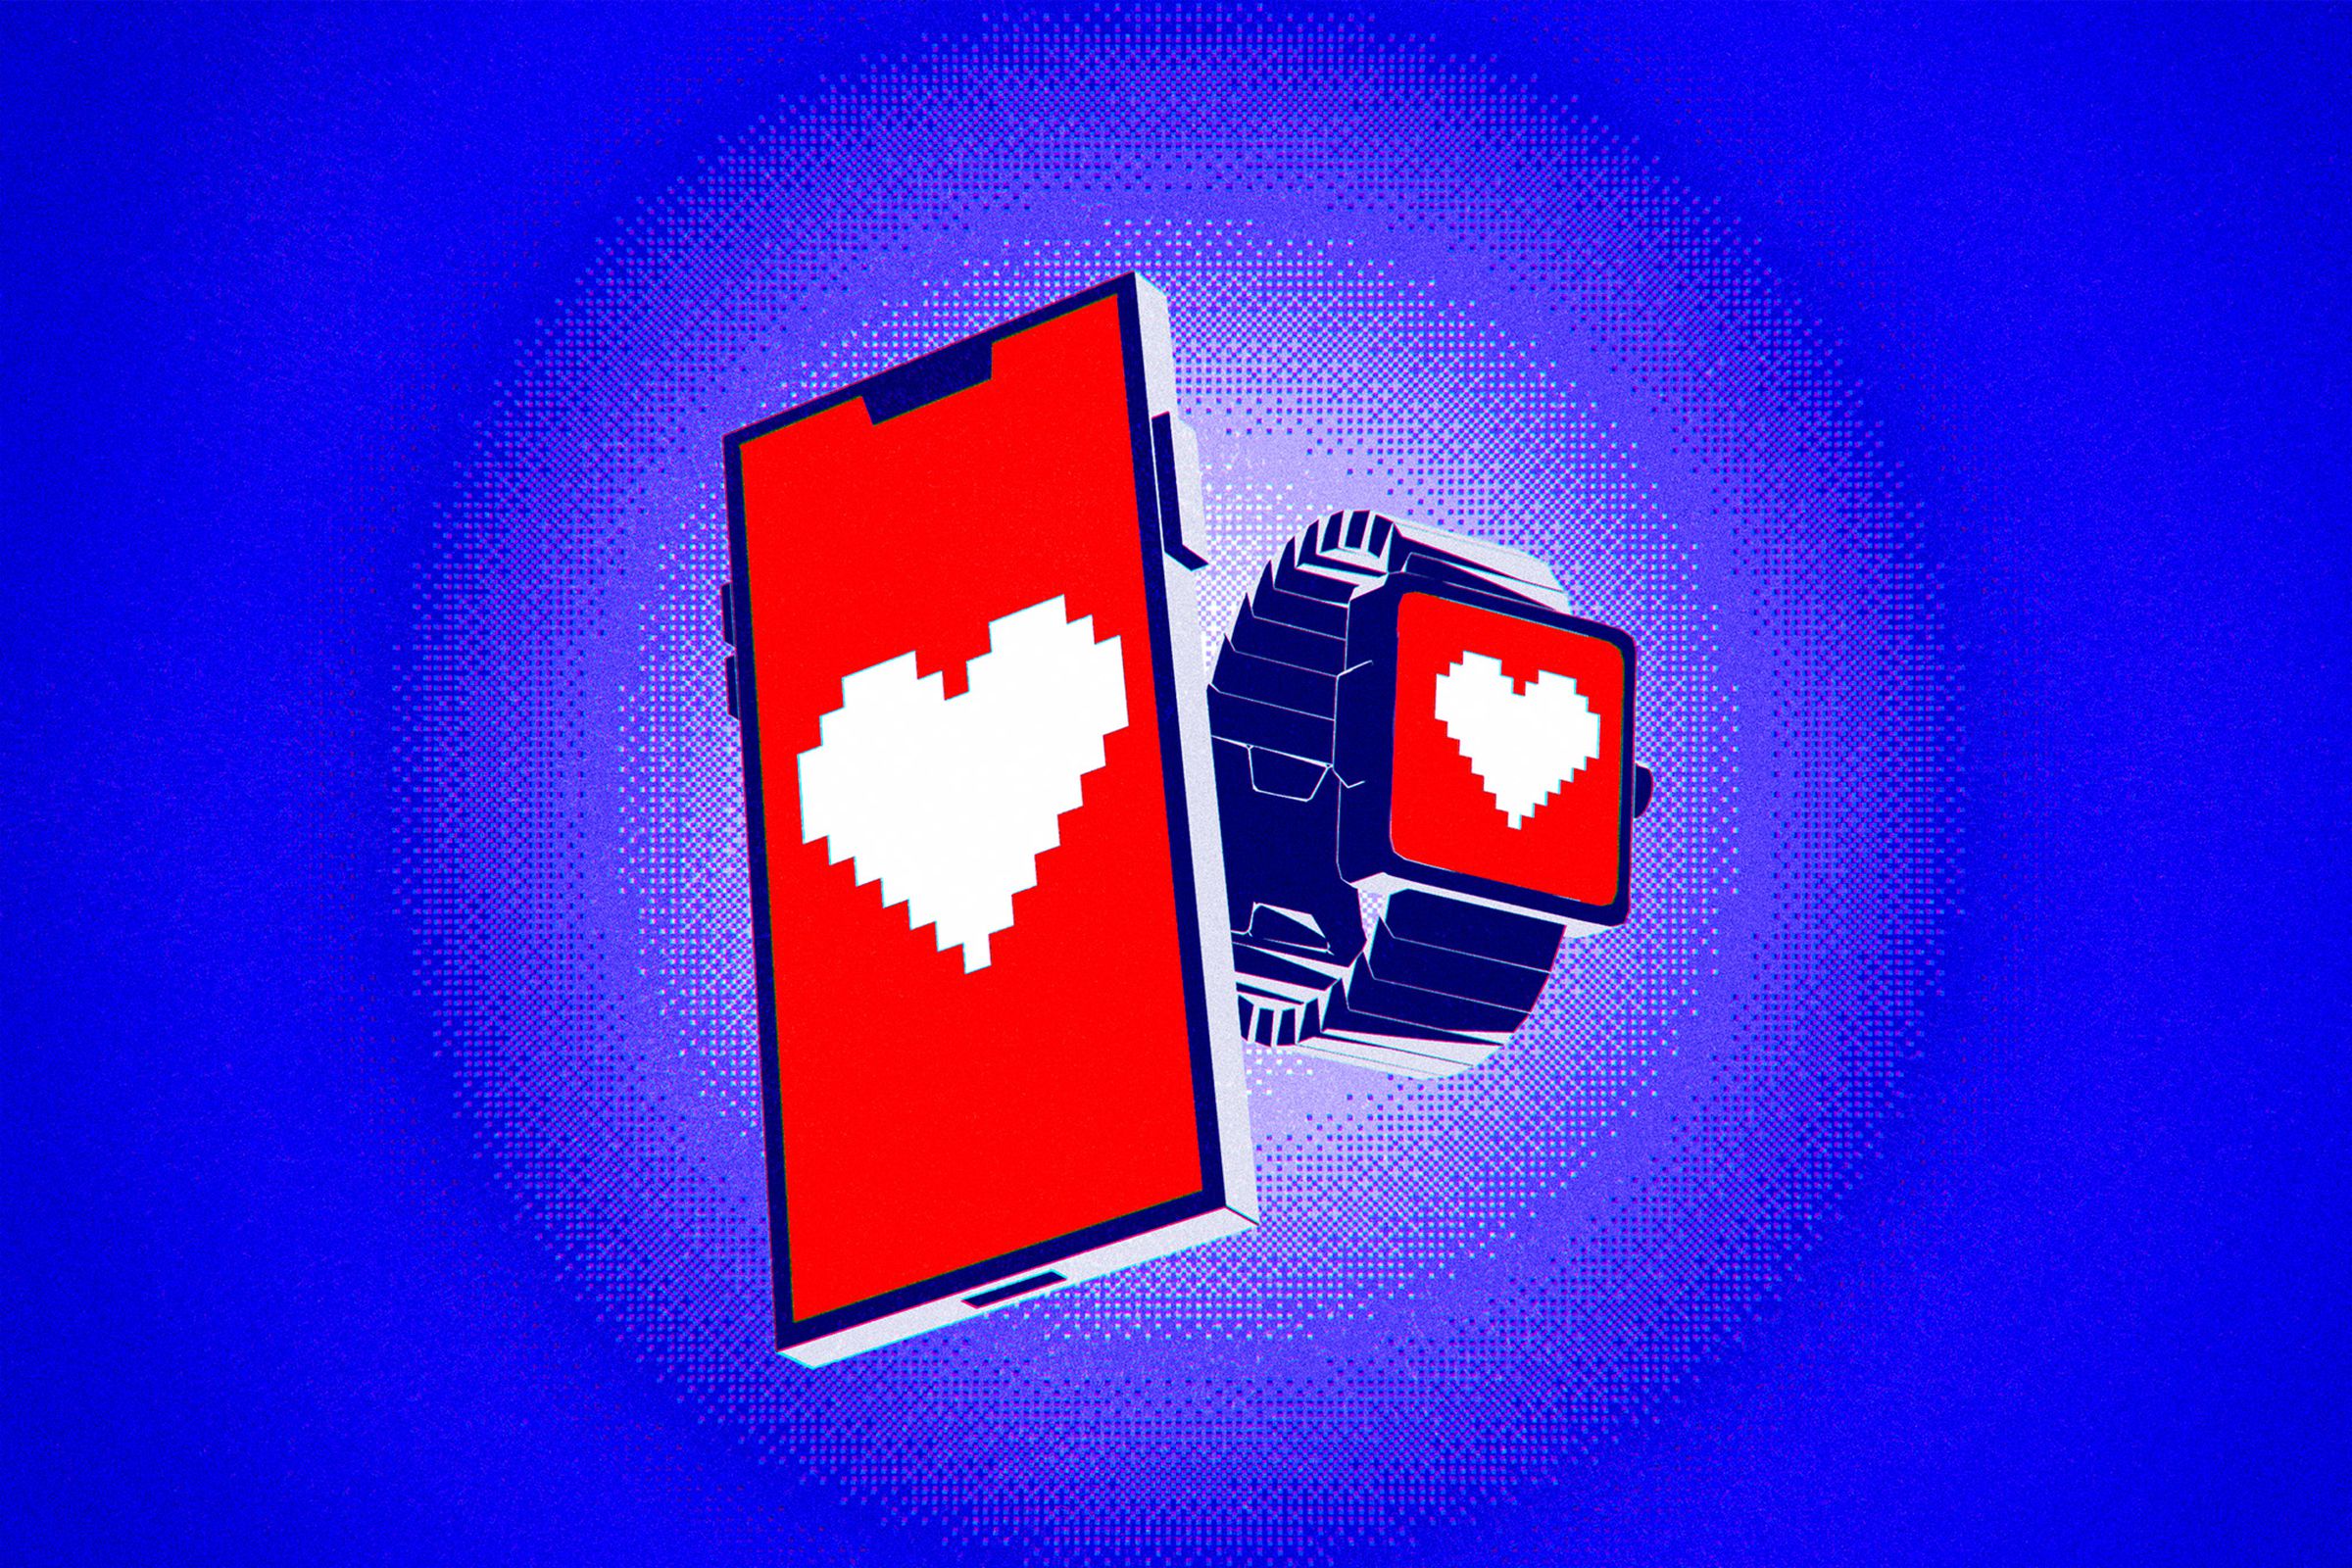 An illustration of an image of a phone and watch, with hearts on them.